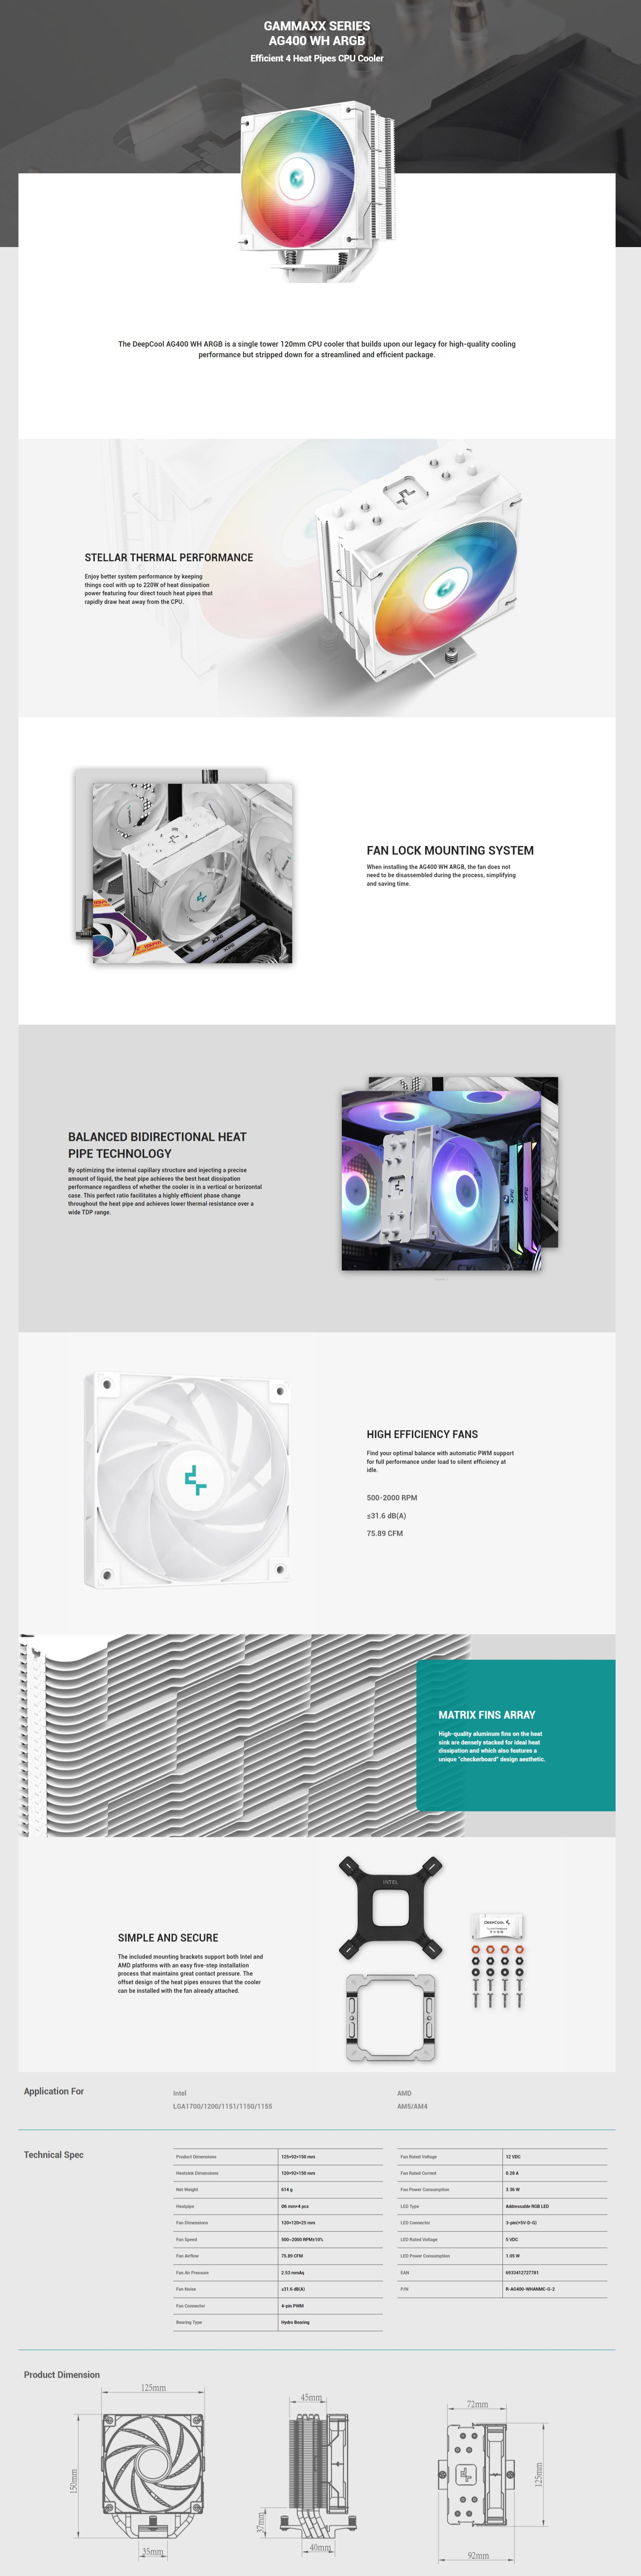 A large marketing image providing additional information about the product DeepCool AG400 ARGB CPU Cooler - White  - Additional alt info not provided